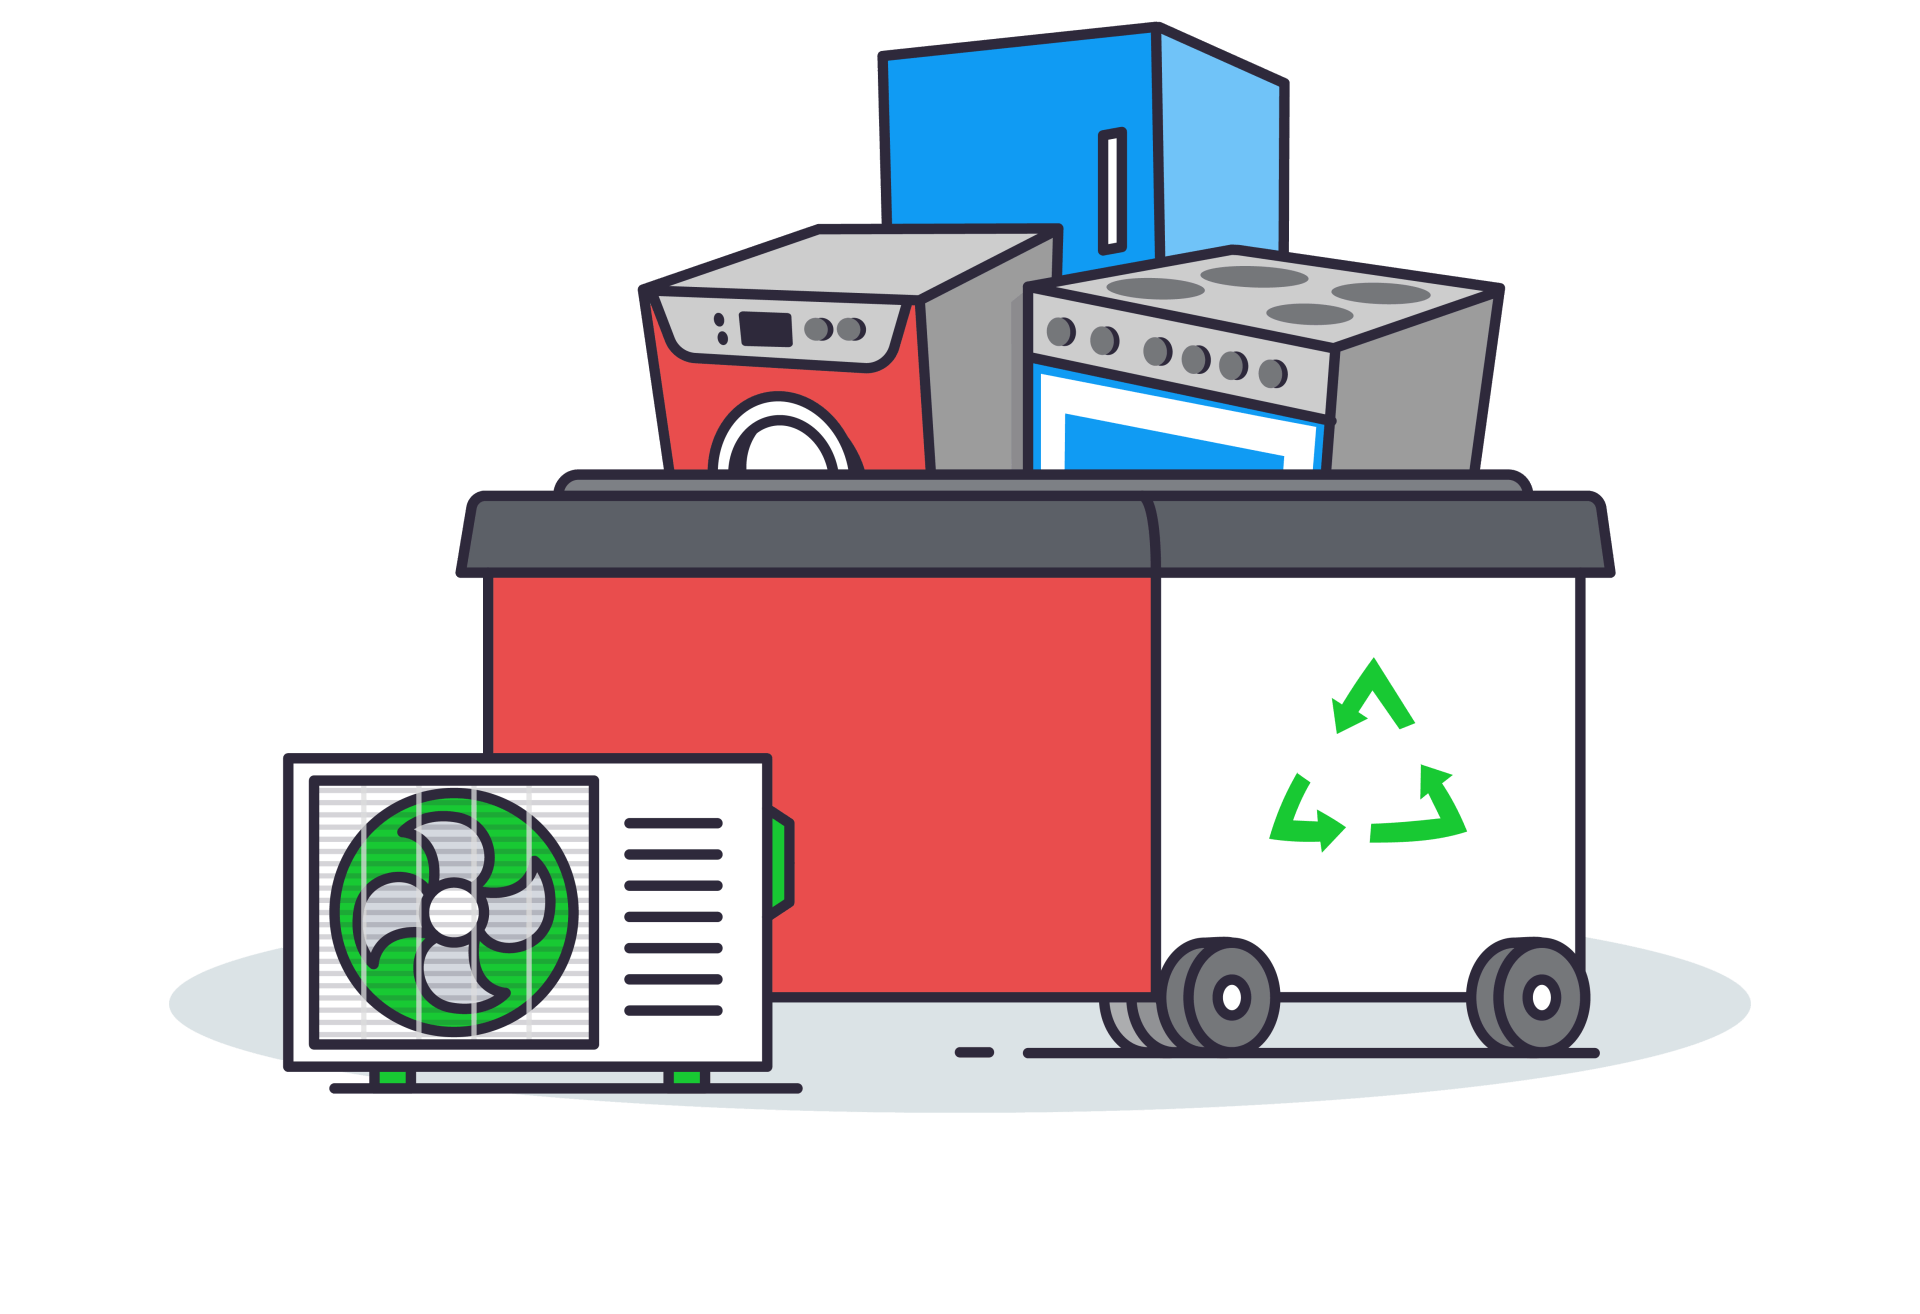 Appliance Removal Services